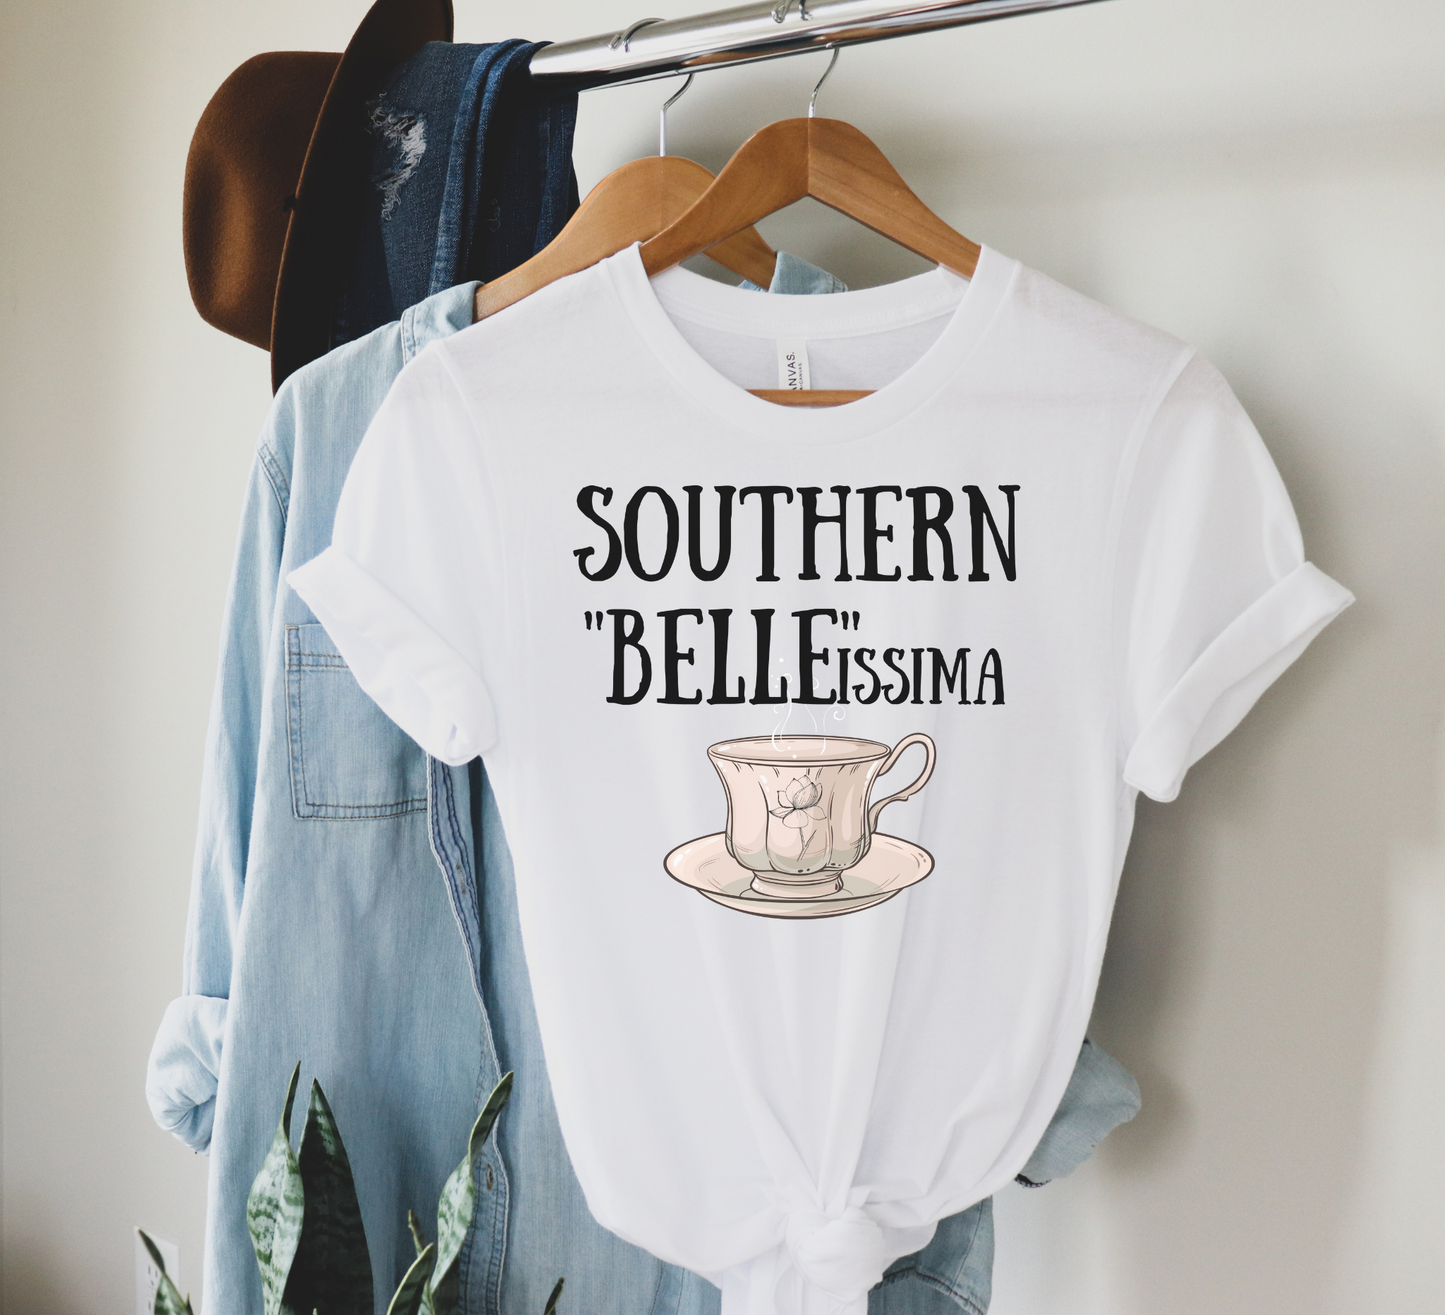 Southern "Belle"issima T-Shirt - Bourbon in a Tea  Cup